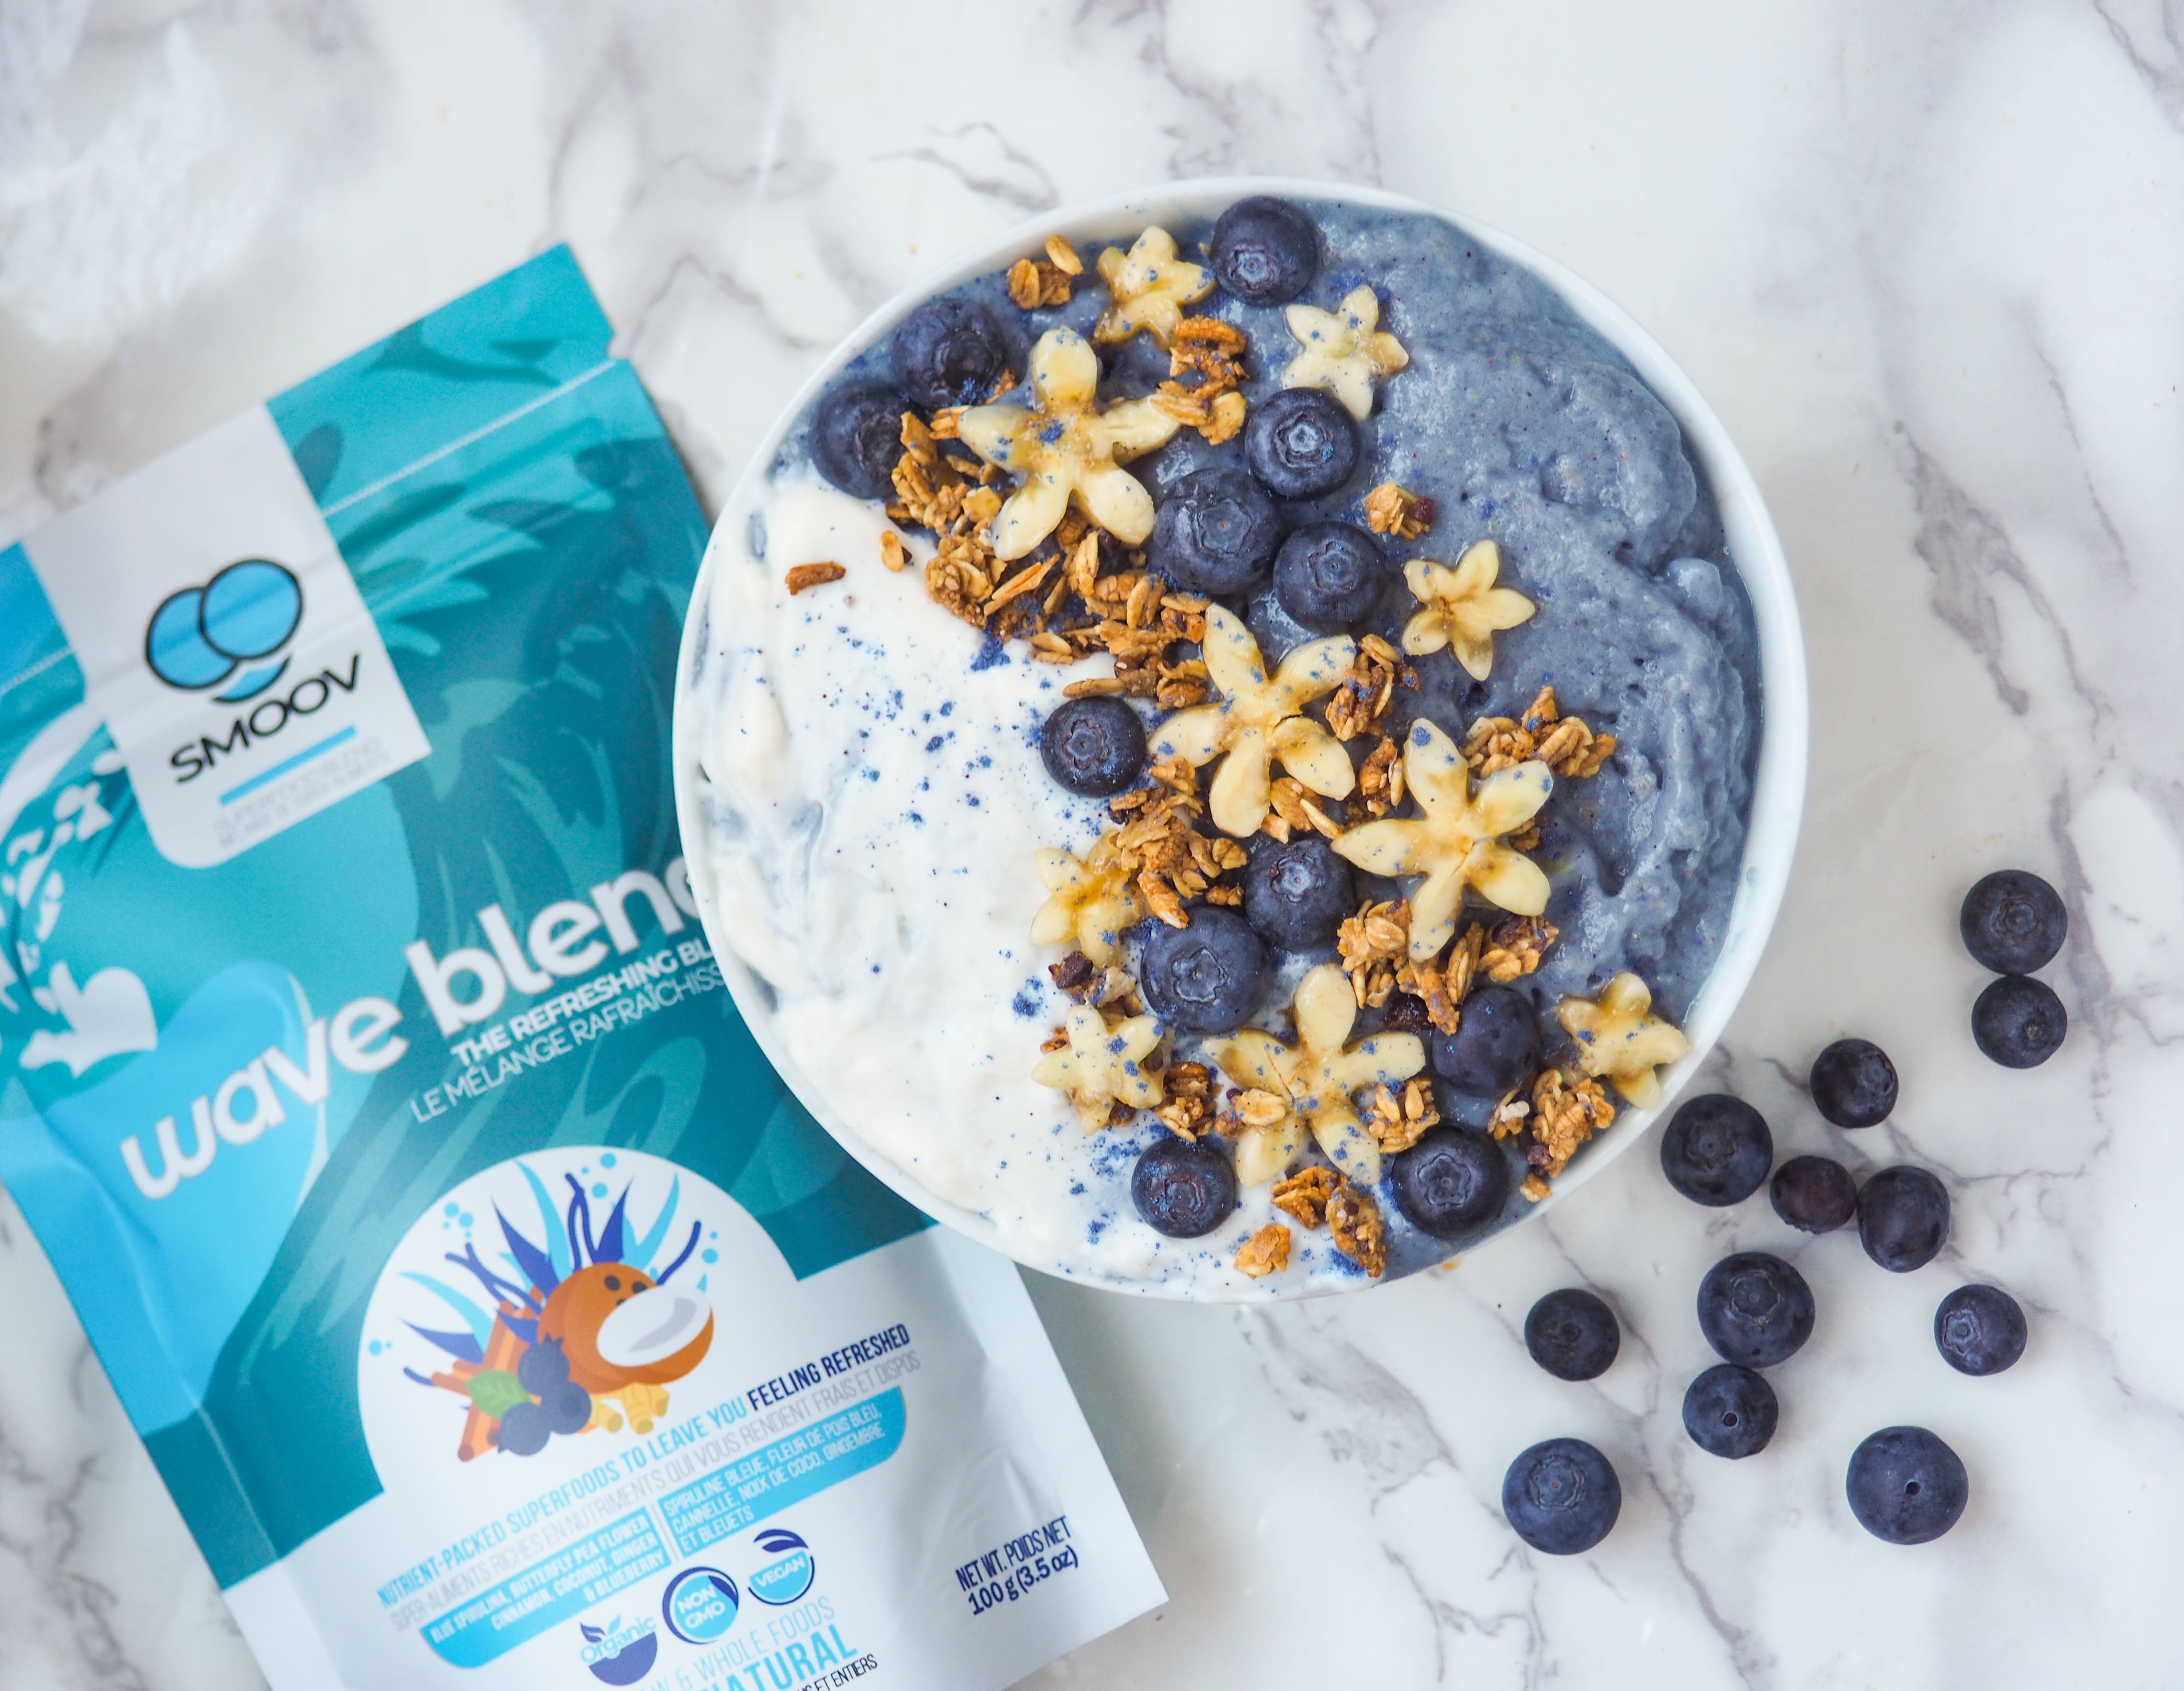 Our naturally colourful wave blend has 6 powerful antioxidant and vitamin B rich superfoods for a refreshing way to enhance energy levels, improve immunity and digestion.